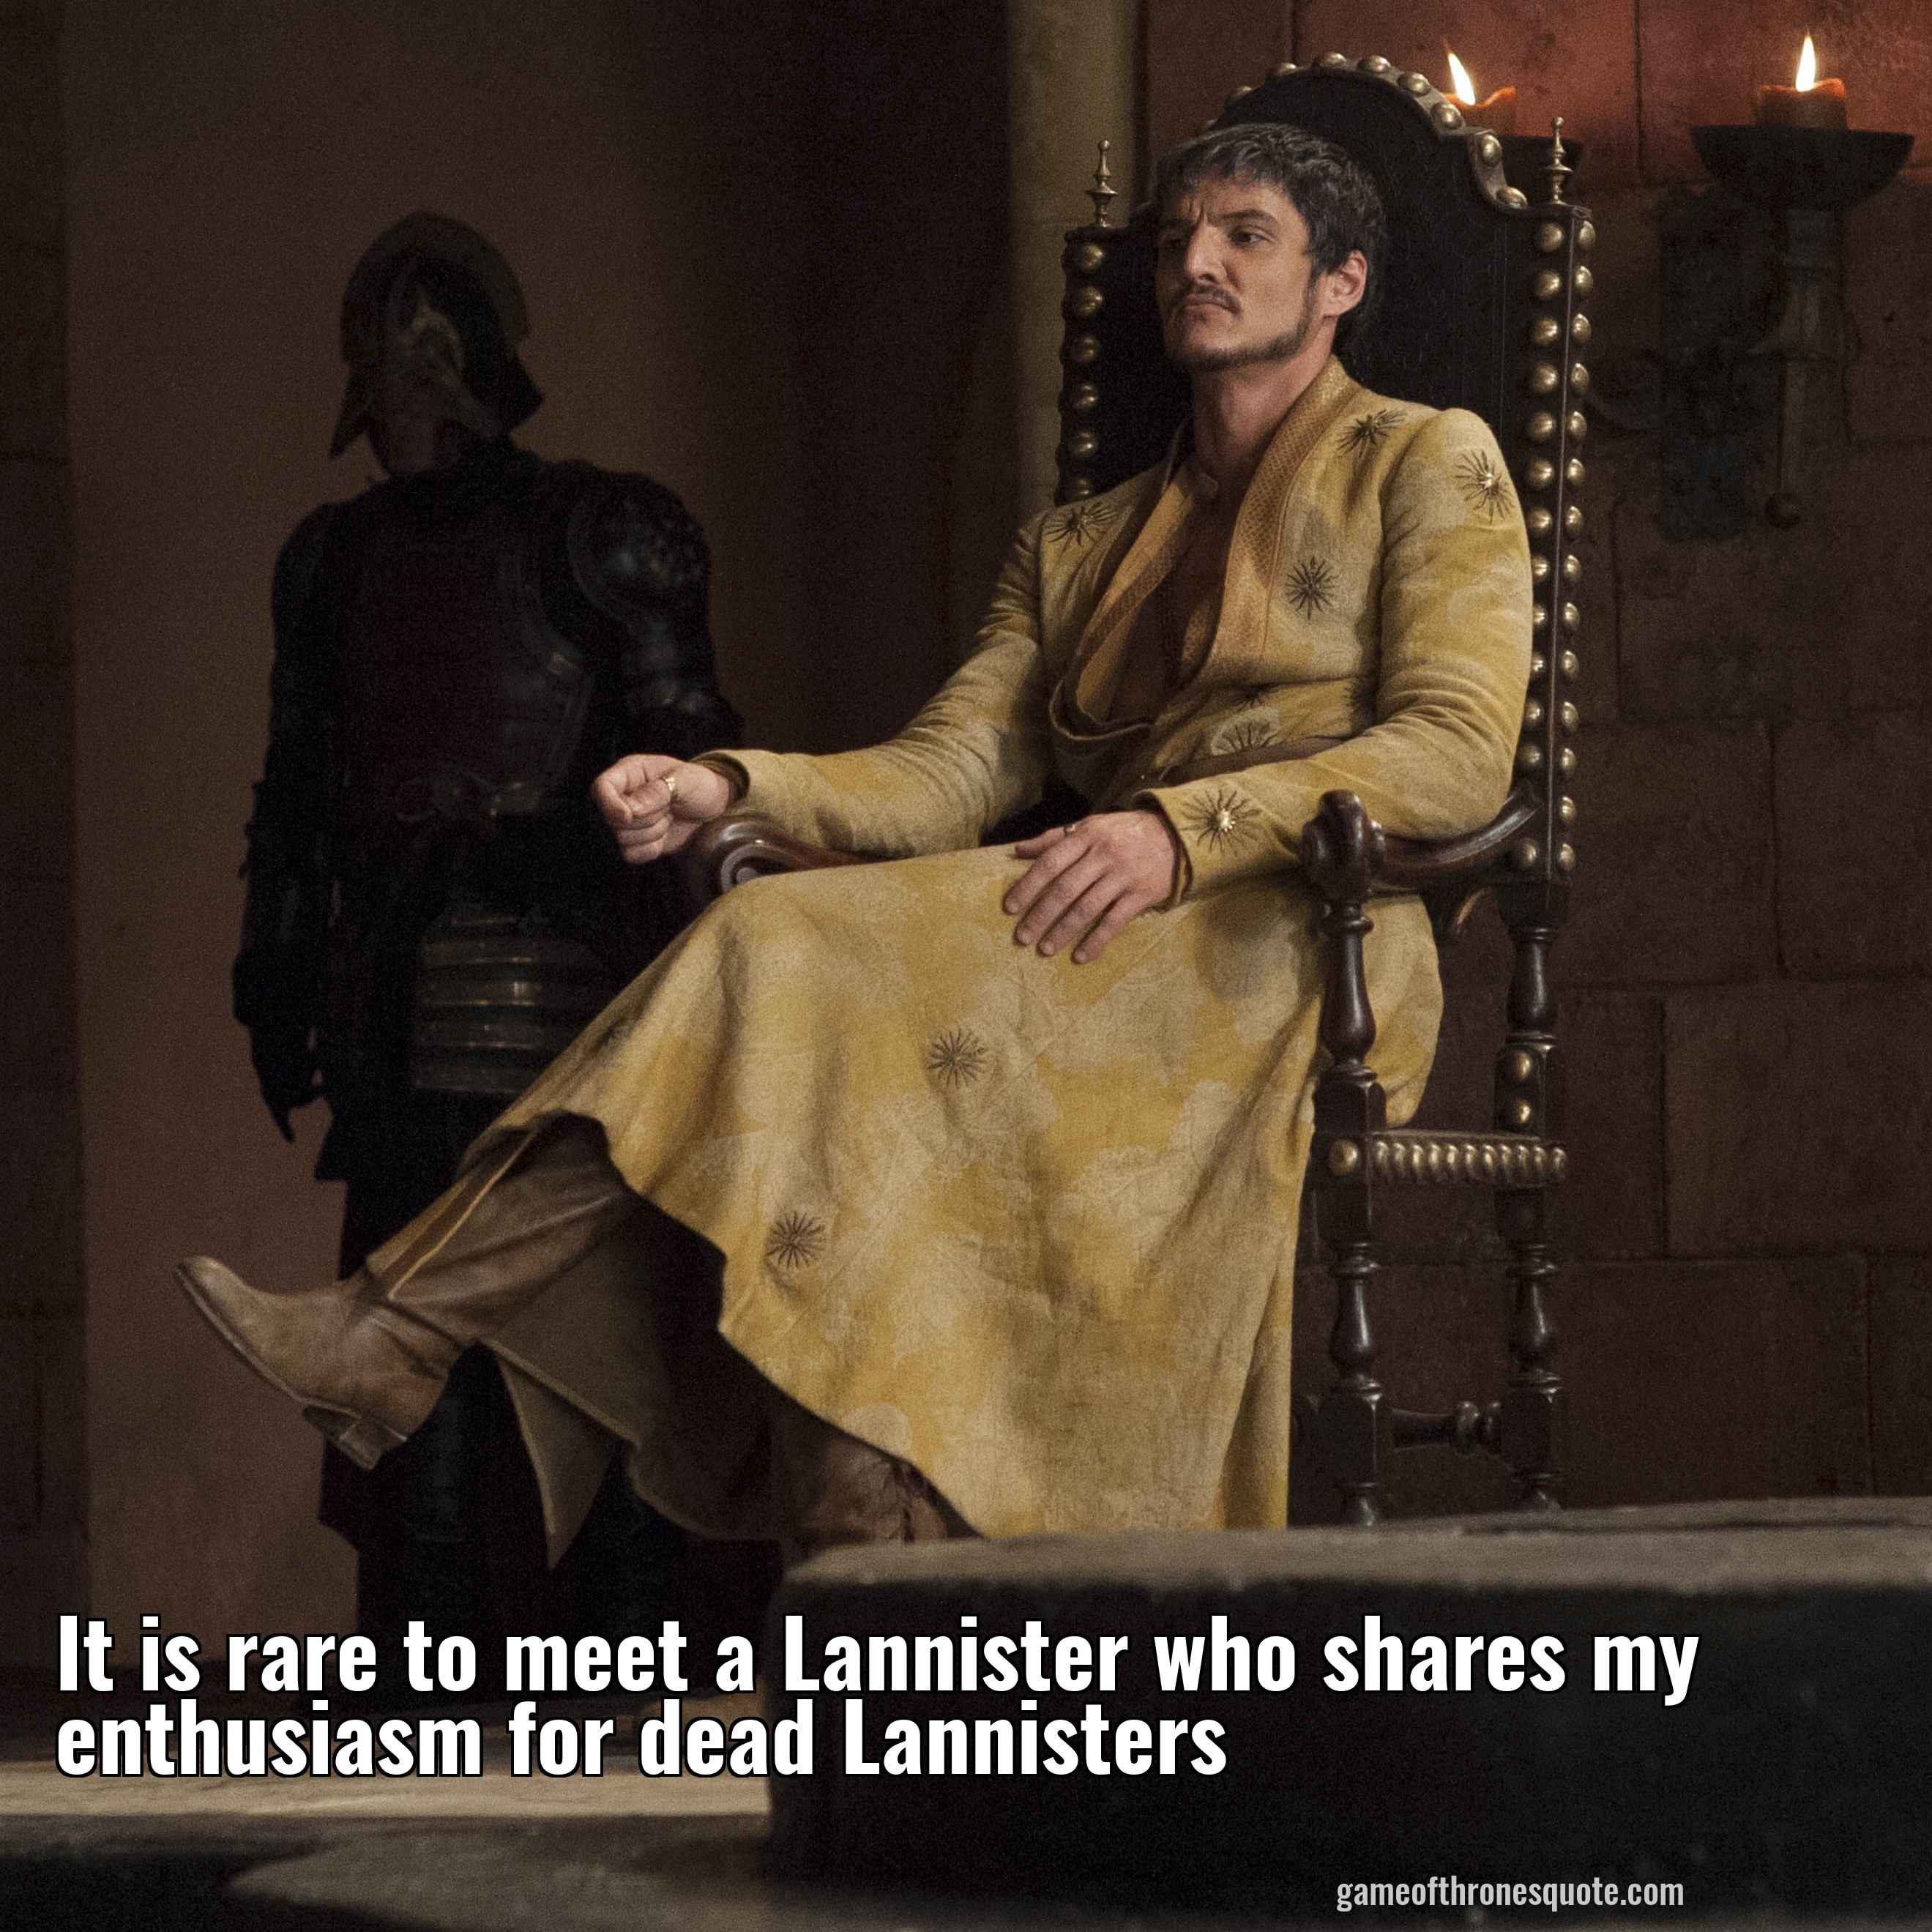 It is rare to meet a Lannister who shares my enthusiasm for dead Lannisters